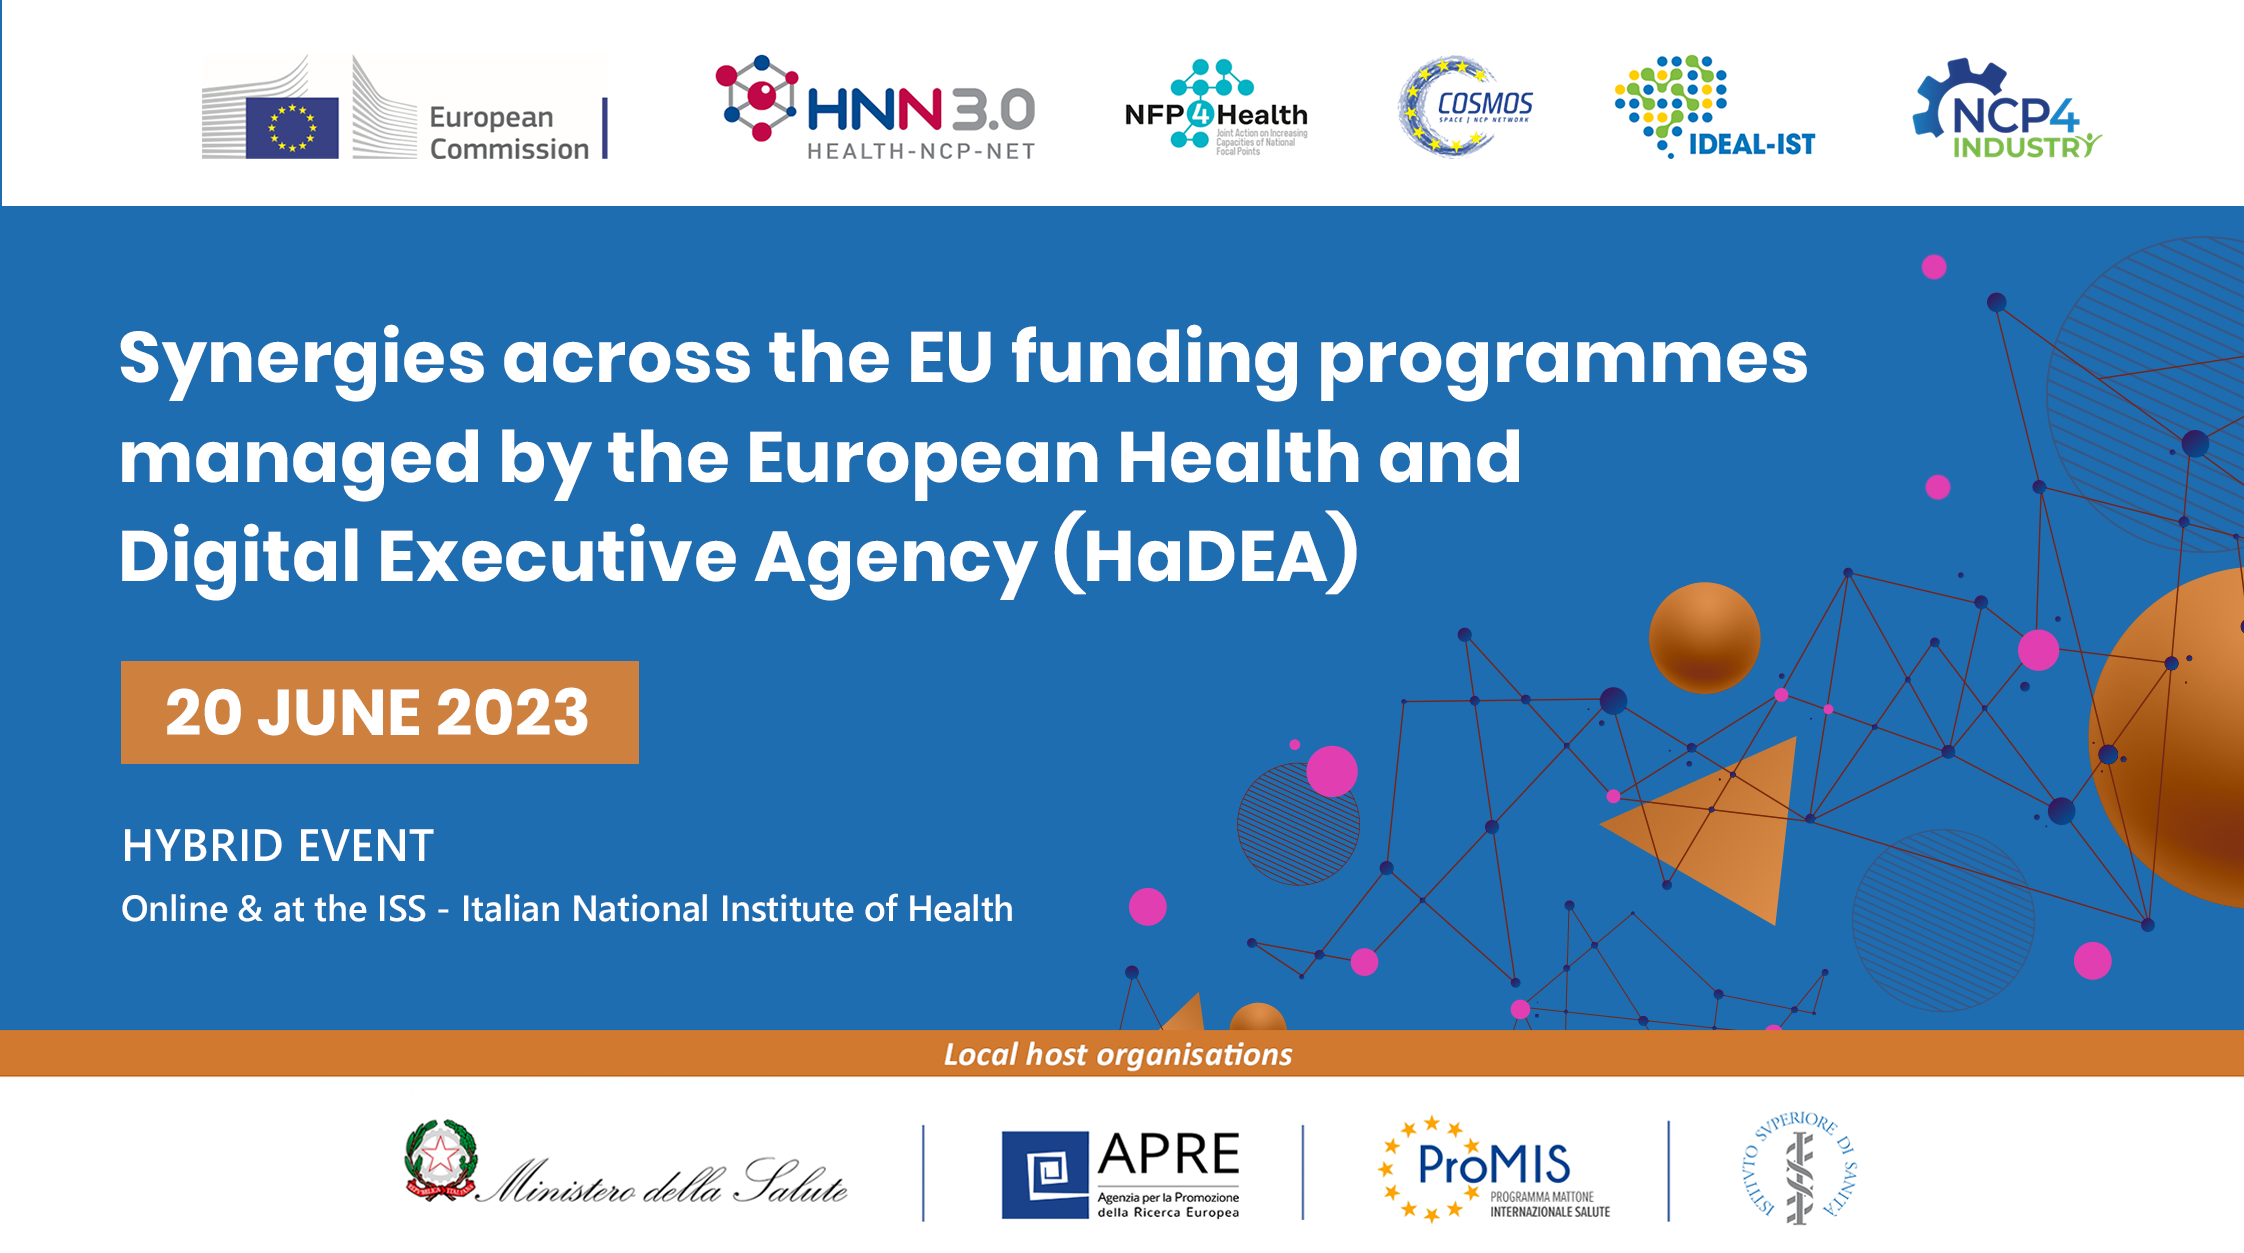 Event "Synergies across the EU funding programmes managed by the European Health and Digital Executive Agency (HaDEA)" on 20 June 2023